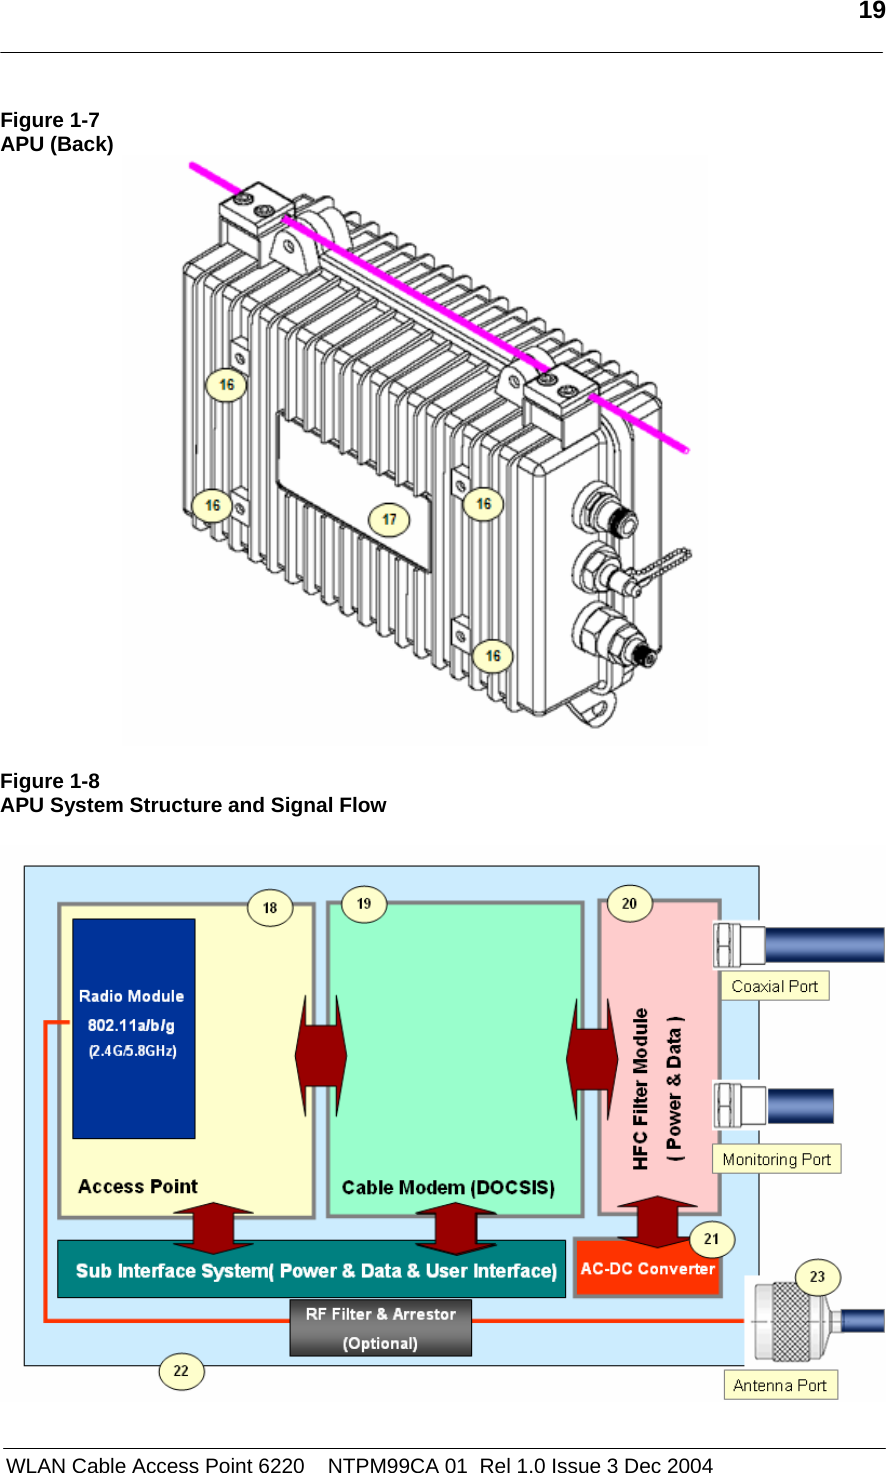   19   WLAN Cable Access Point 6220    NTPM99CA 01  Rel 1.0 Issue 3 Dec 2004 Figure 1-7 APU (Back)   Figure 1-8 APU System Structure and Signal Flow    